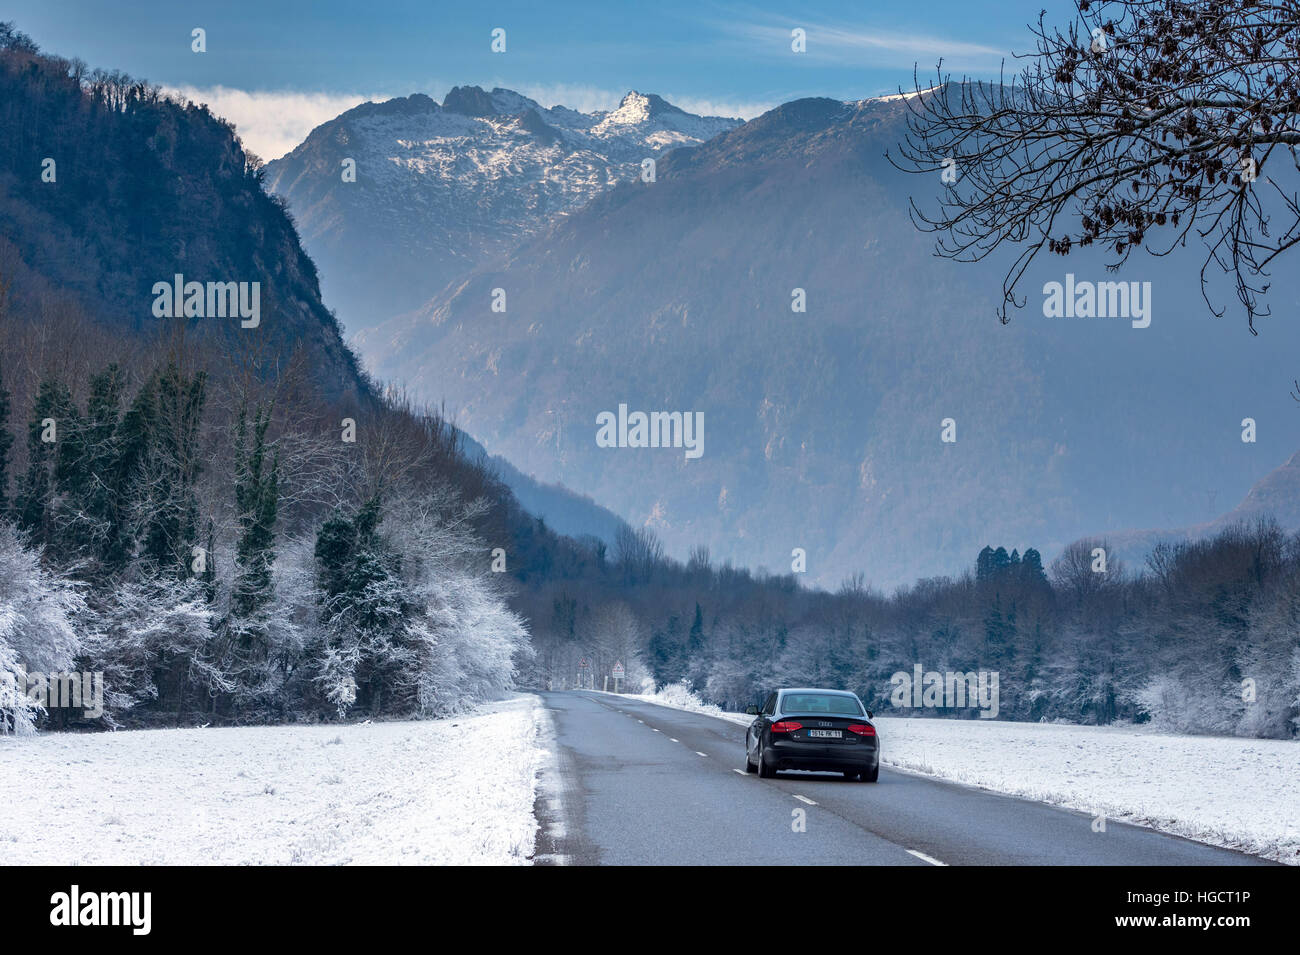 Road running through snowy landscape towards mountains with car Stock Photo